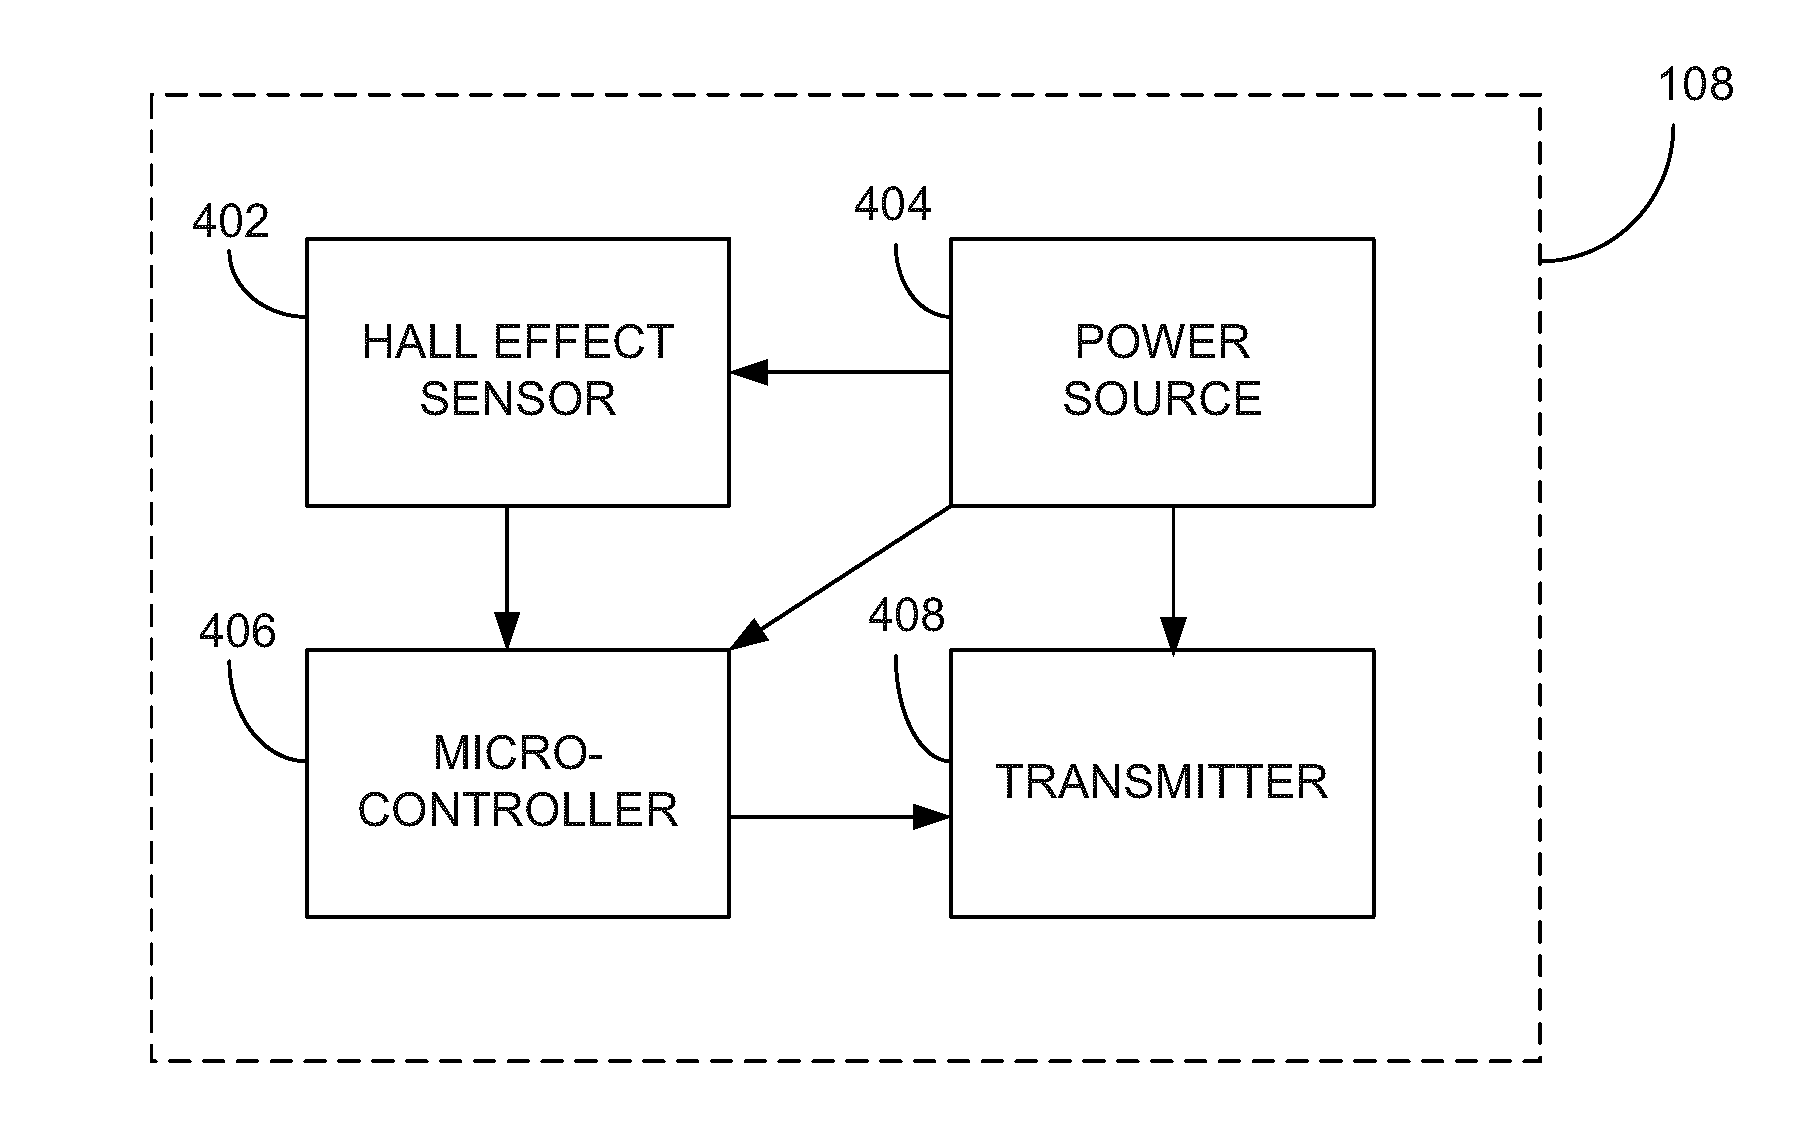 Wireless sensor network for measurement of electrical energy consumption